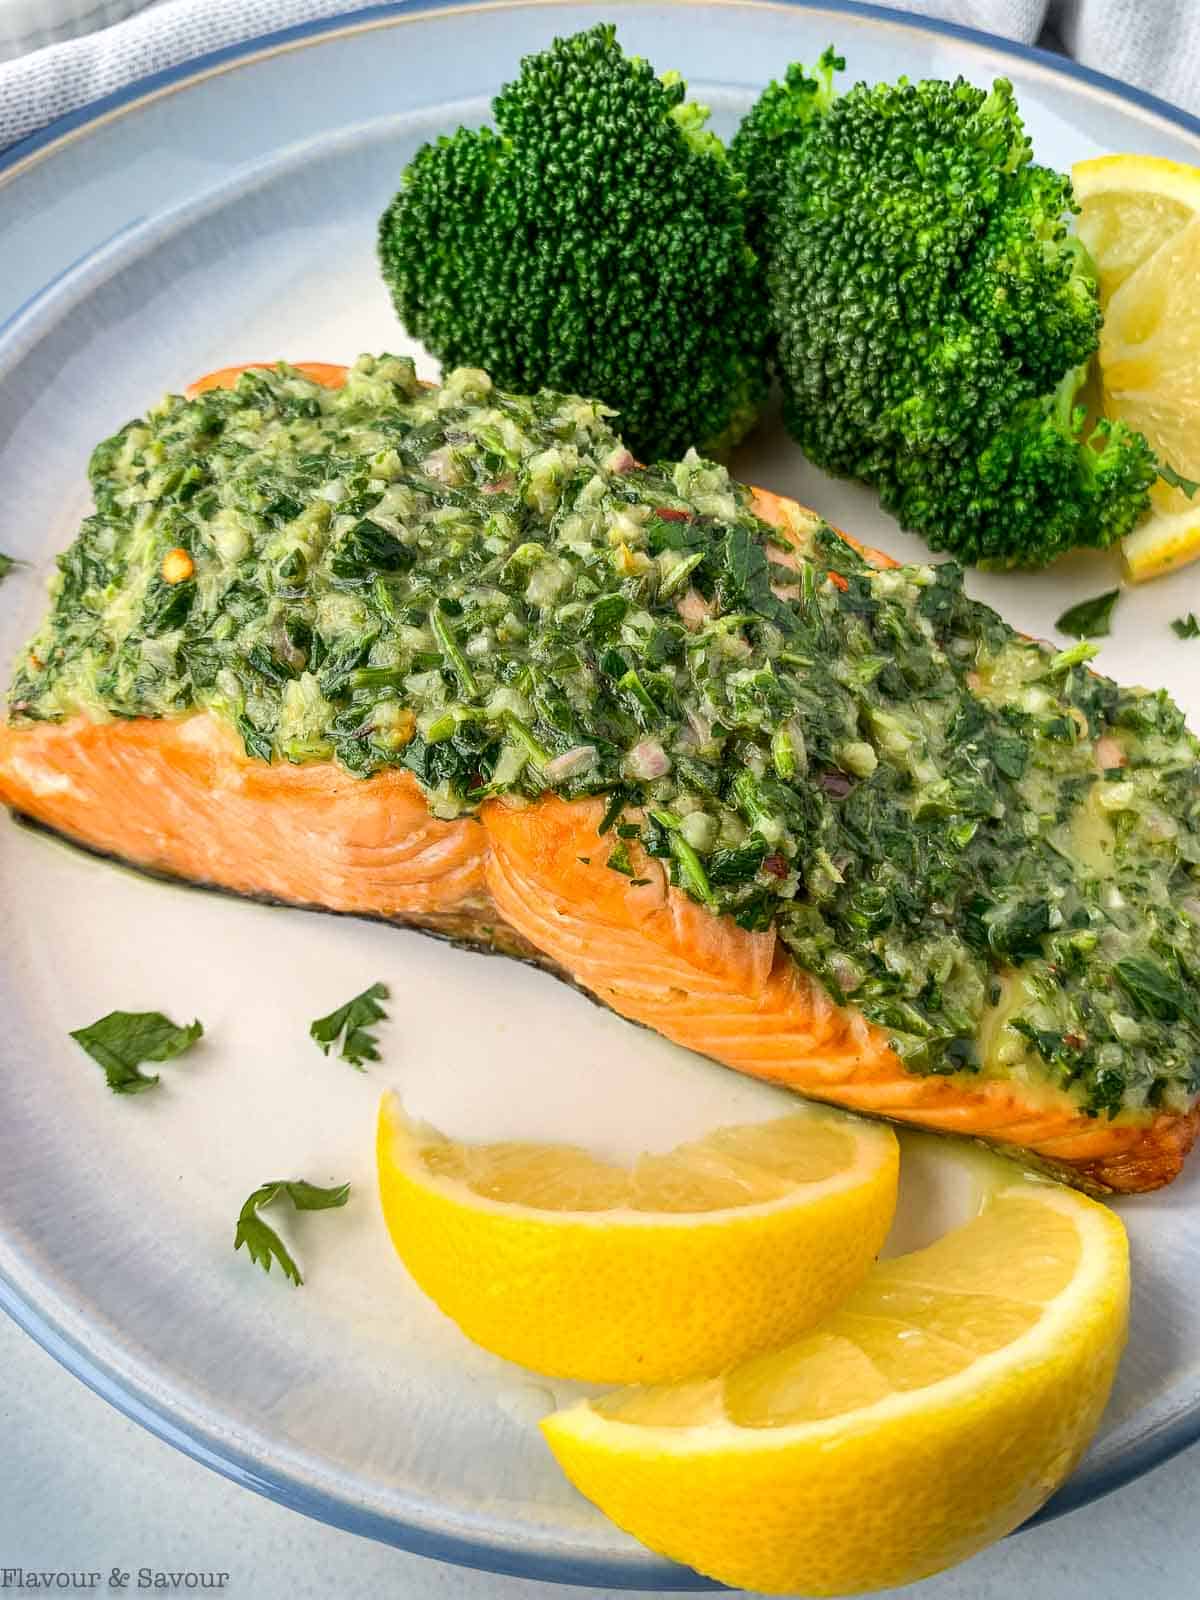 a filet of salmon with chimmichurri sauce with broccoli and lemon wedges